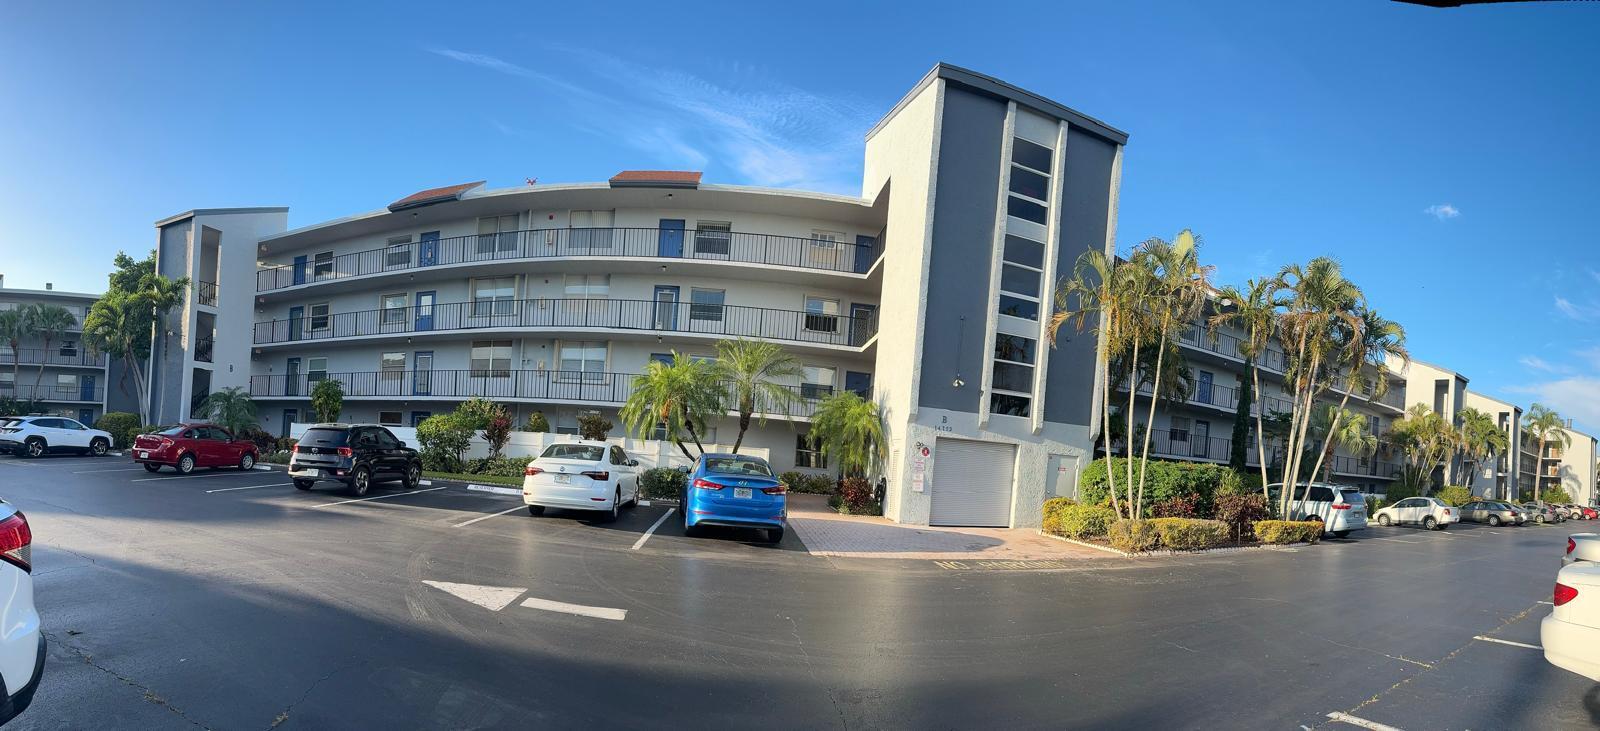 Gorgeous condo overlooking the water! Villages of Oriole Deauville.  Gated Community and brand new clubhouse.  55+ age.  Close to shopping, entertainment, restaurants, salons.  New A/C Unit installed on 12/2023.  All appliances included. Vacant on lockbox, show anytime!  SELLER PAYS ALL ASSESSMENTS!!!